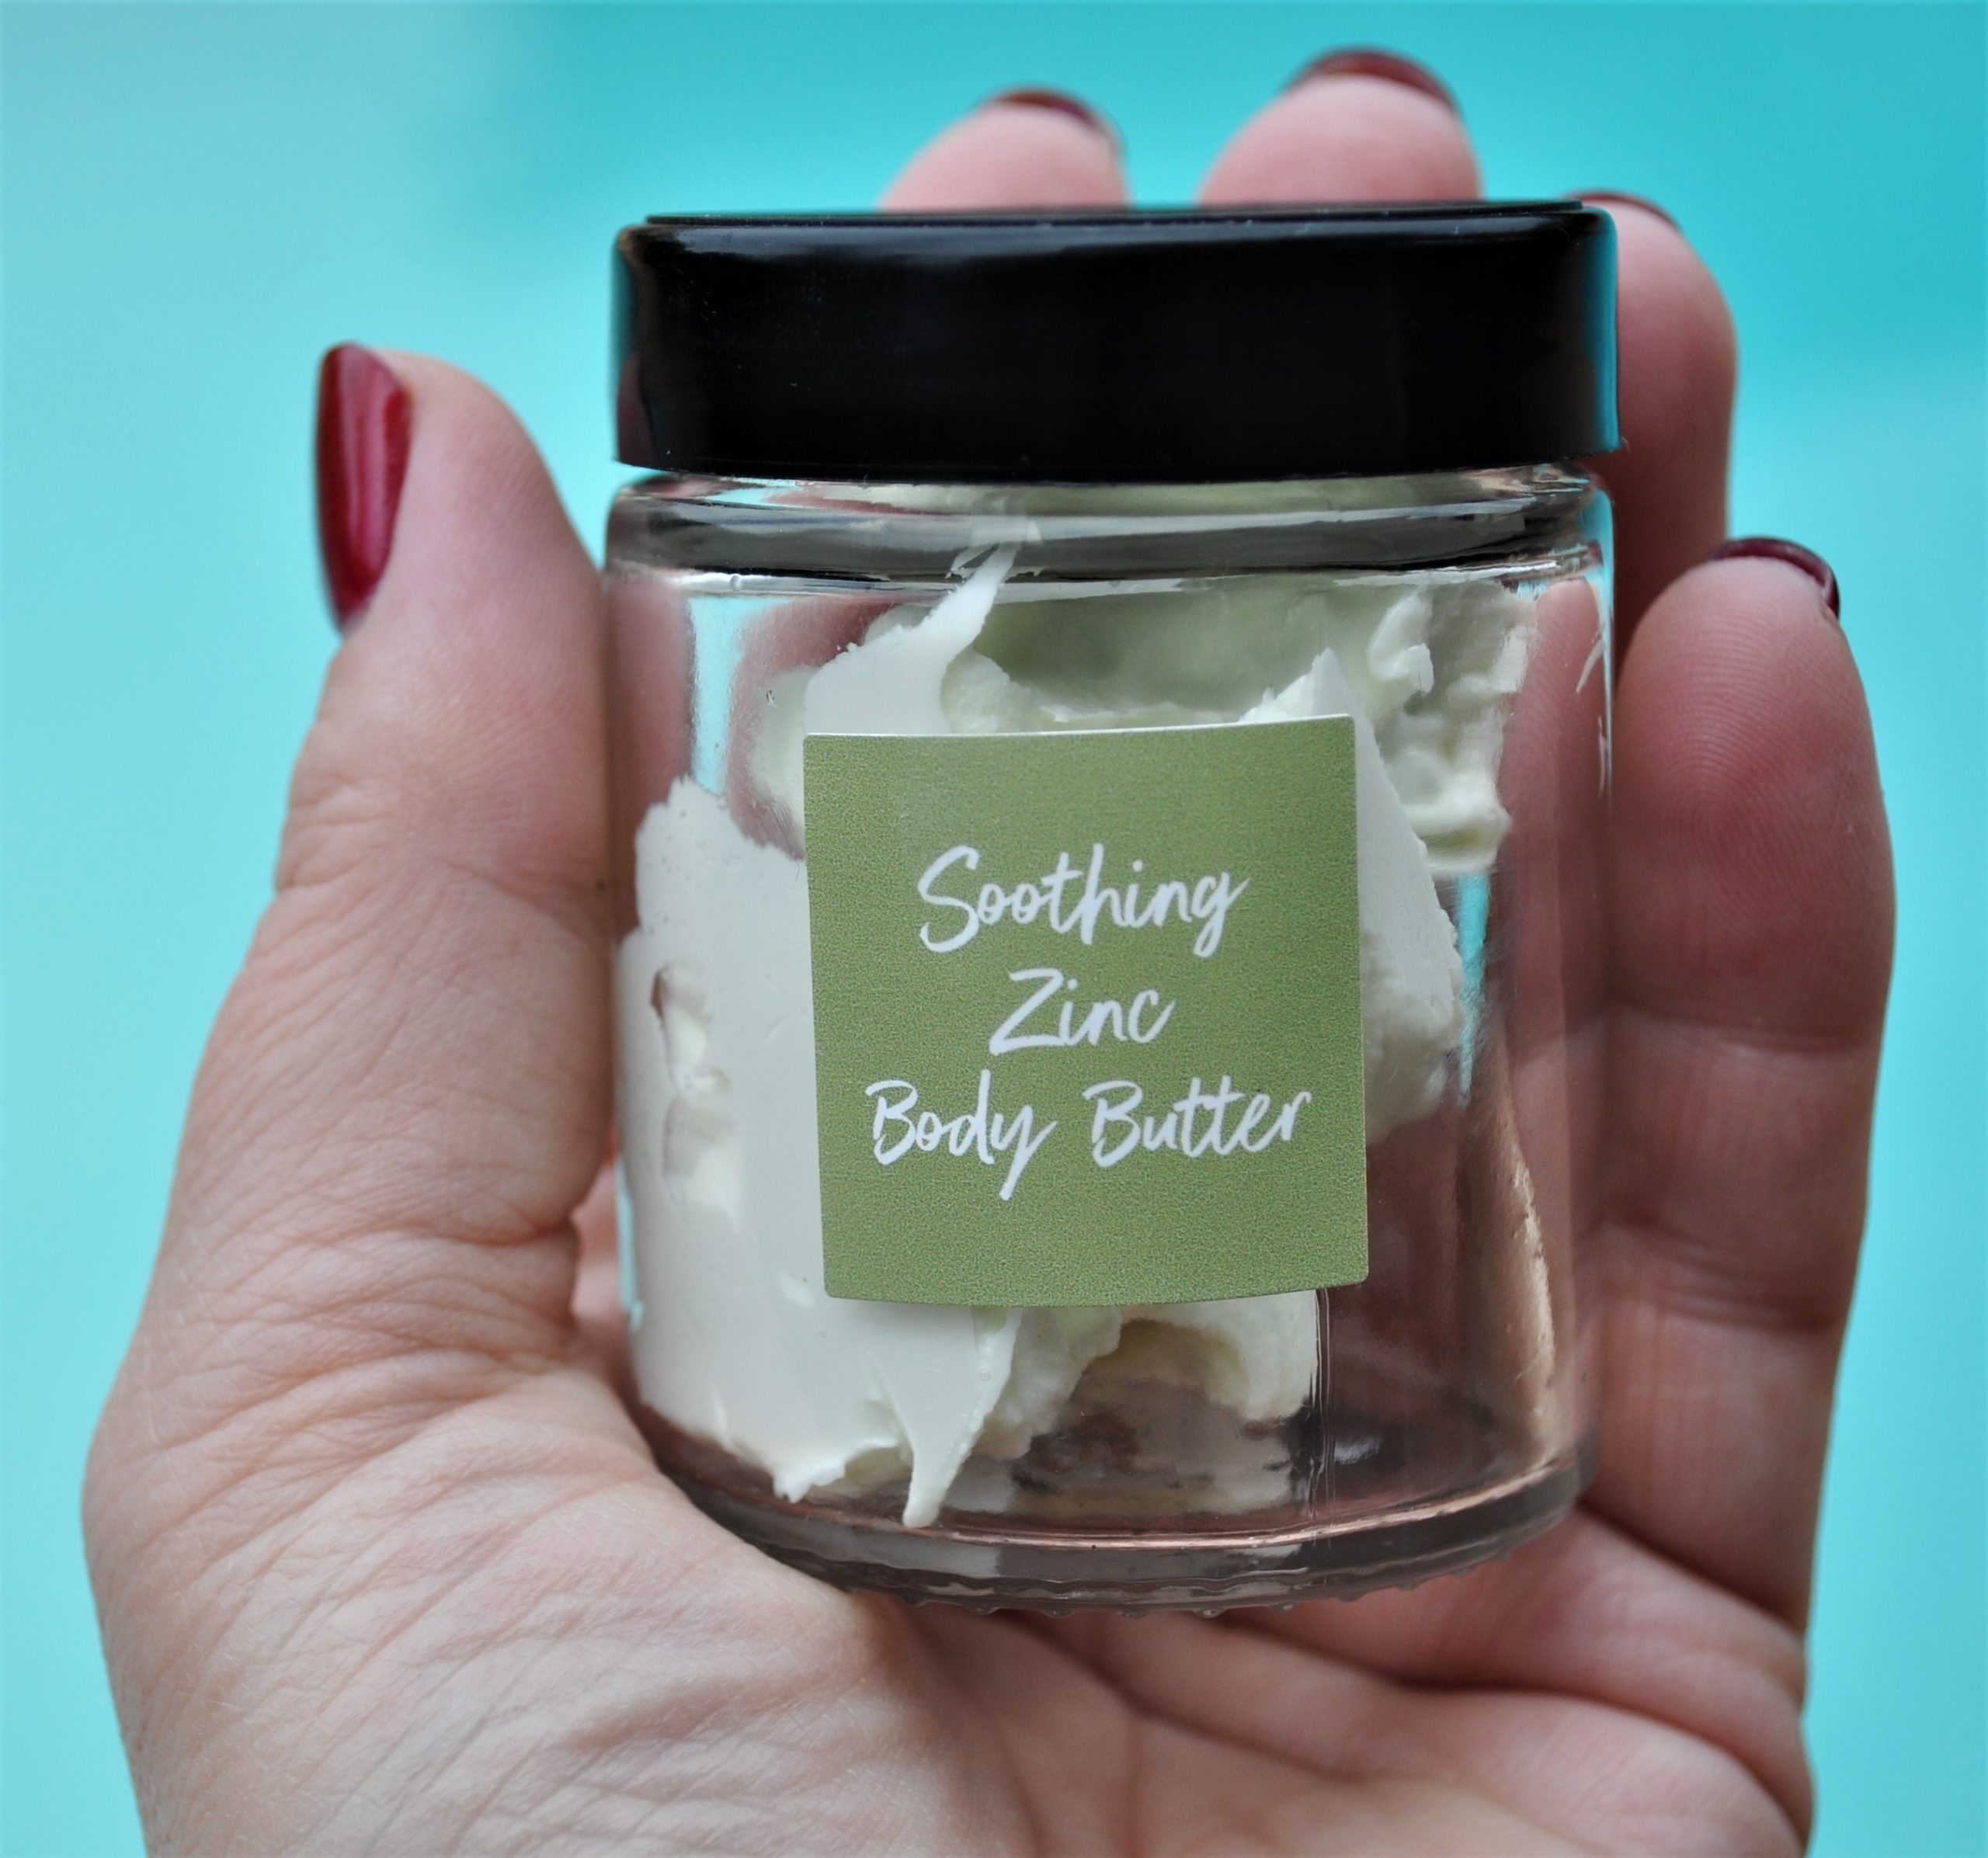 Soothing Zinc Body Butter